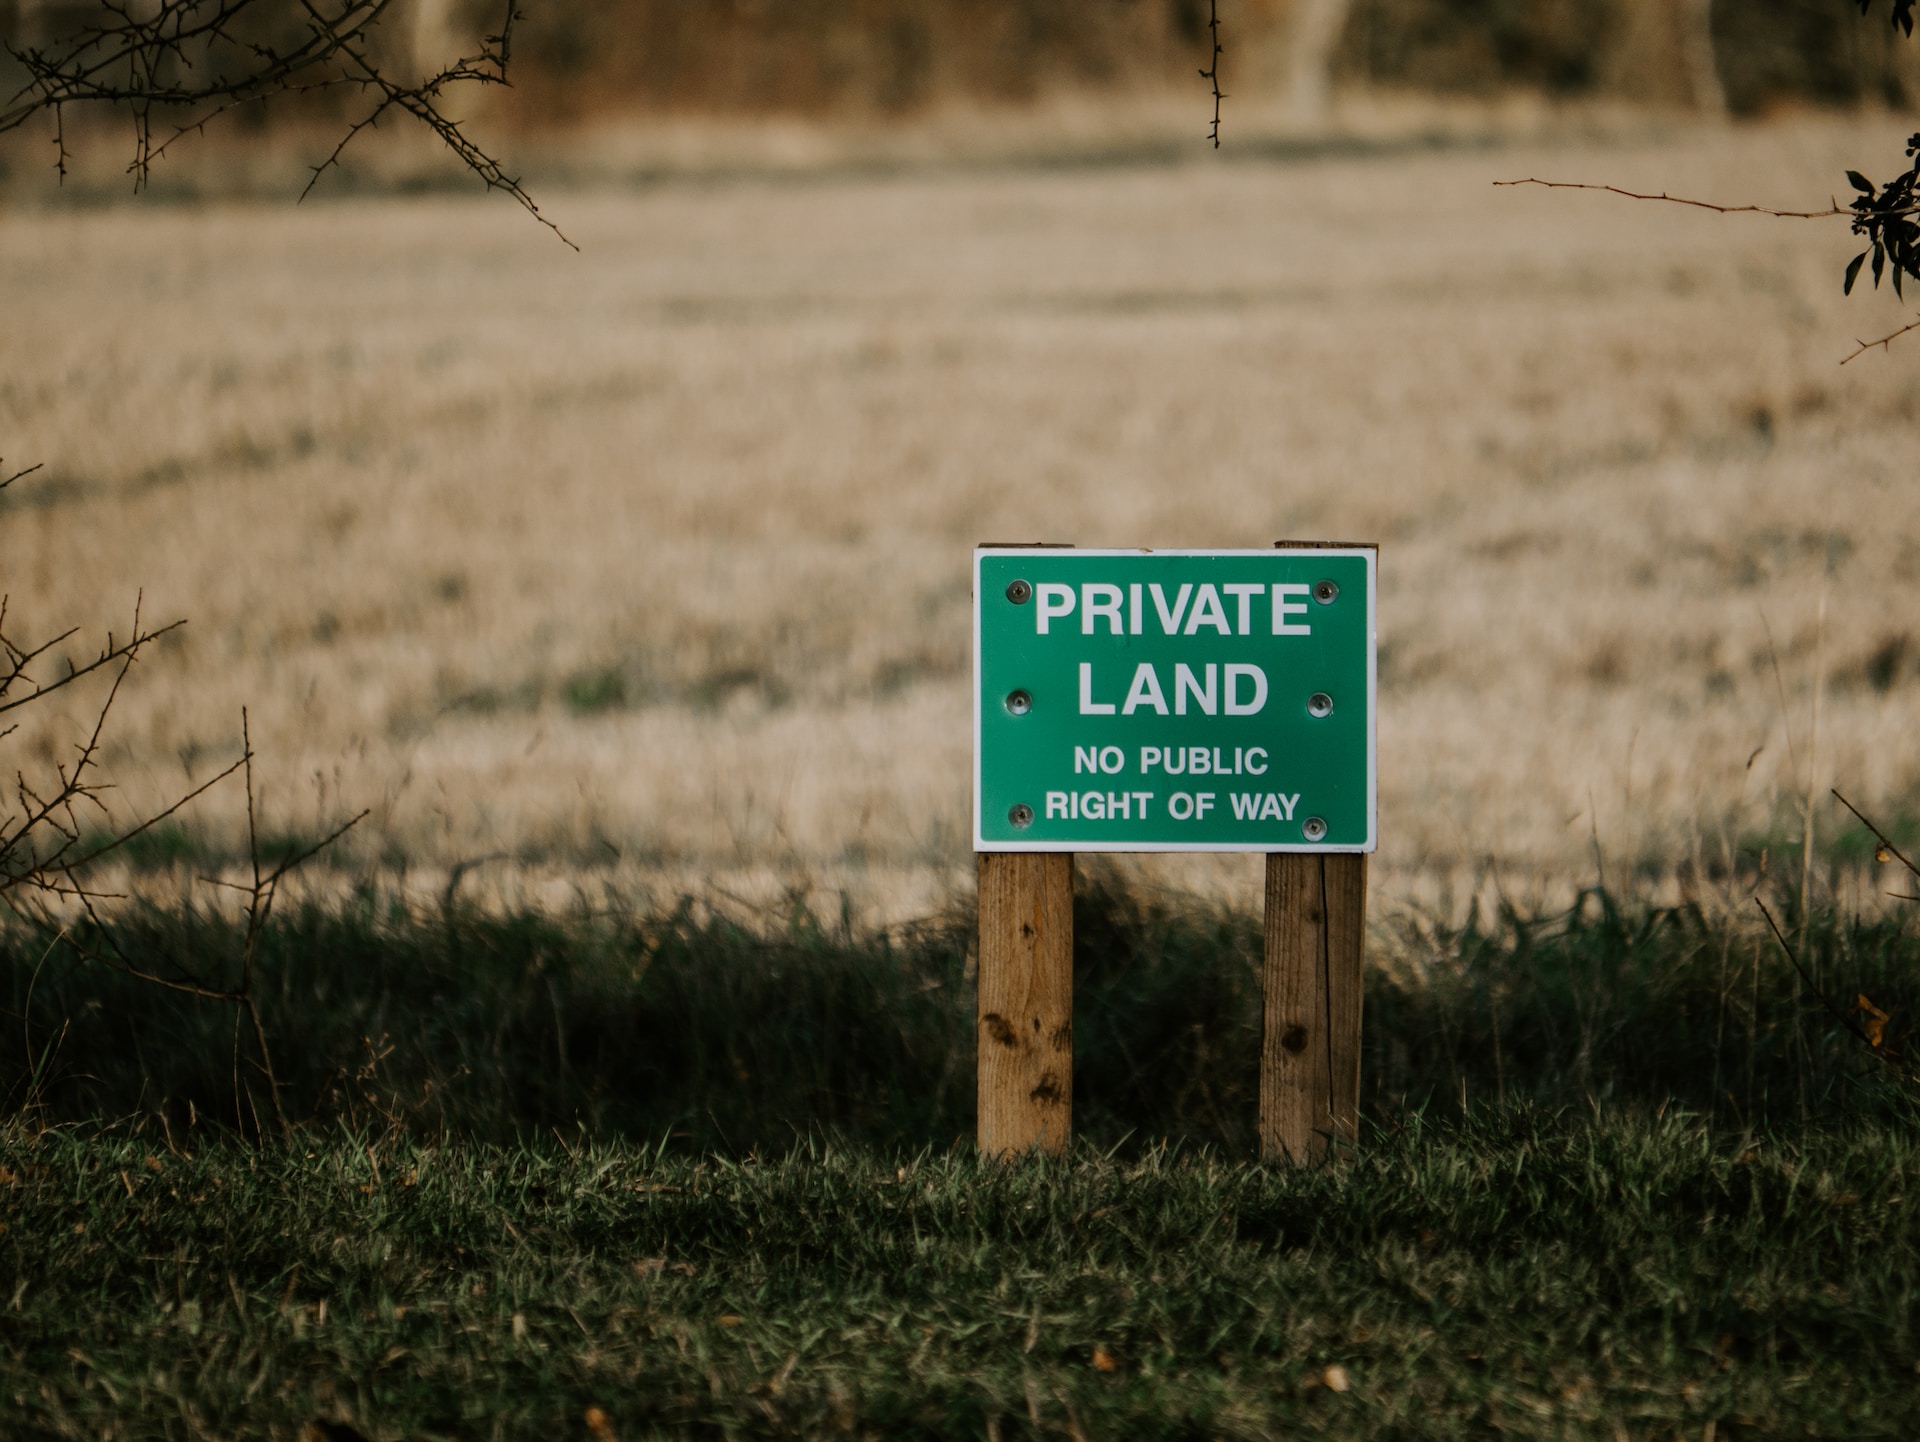 Sign "Private Land" in front of a designated plot of land